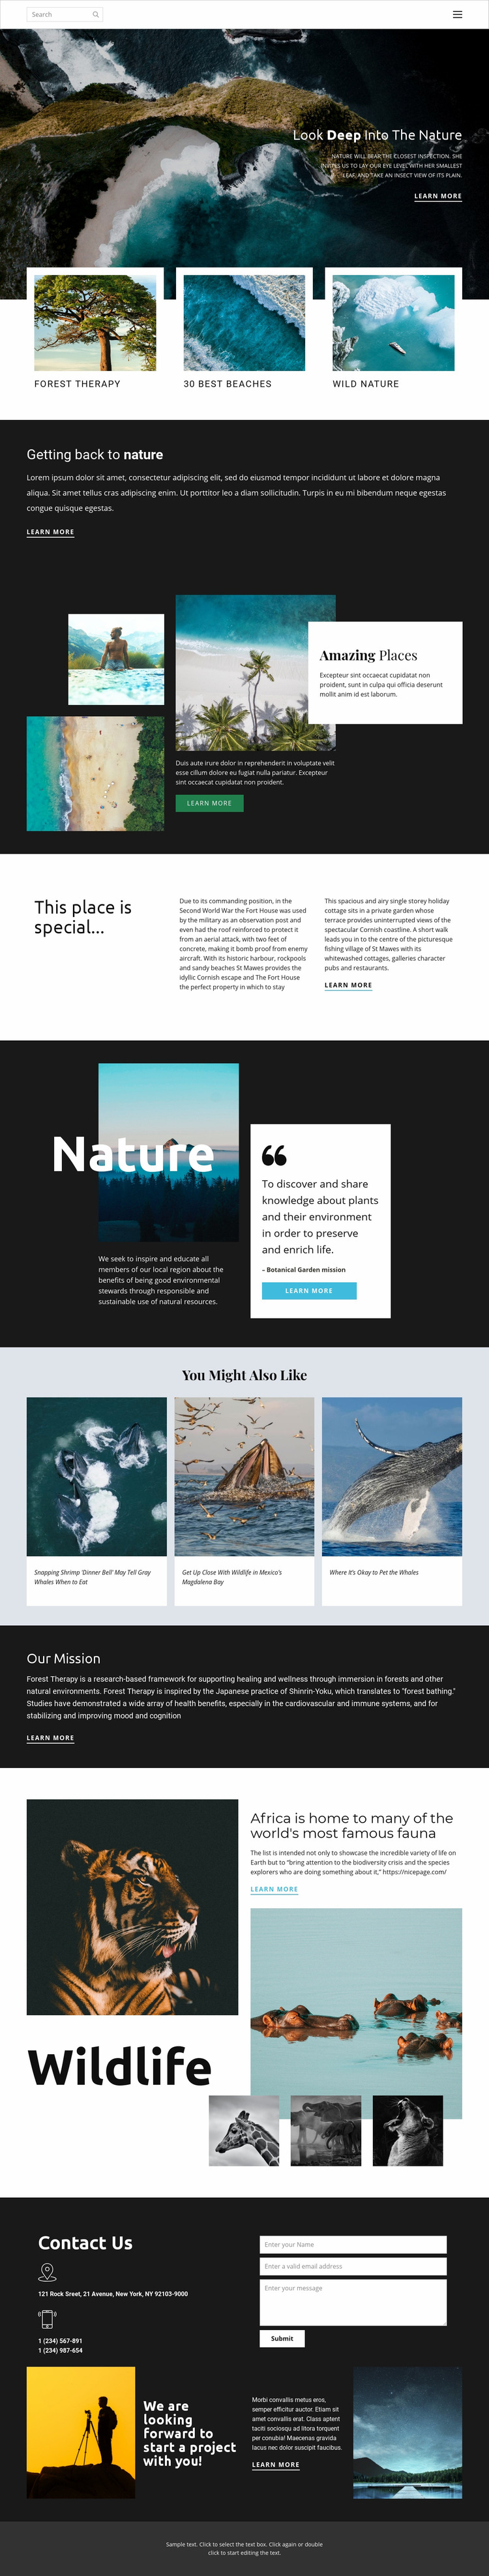 Exploring wildlife and nature Web Page Design